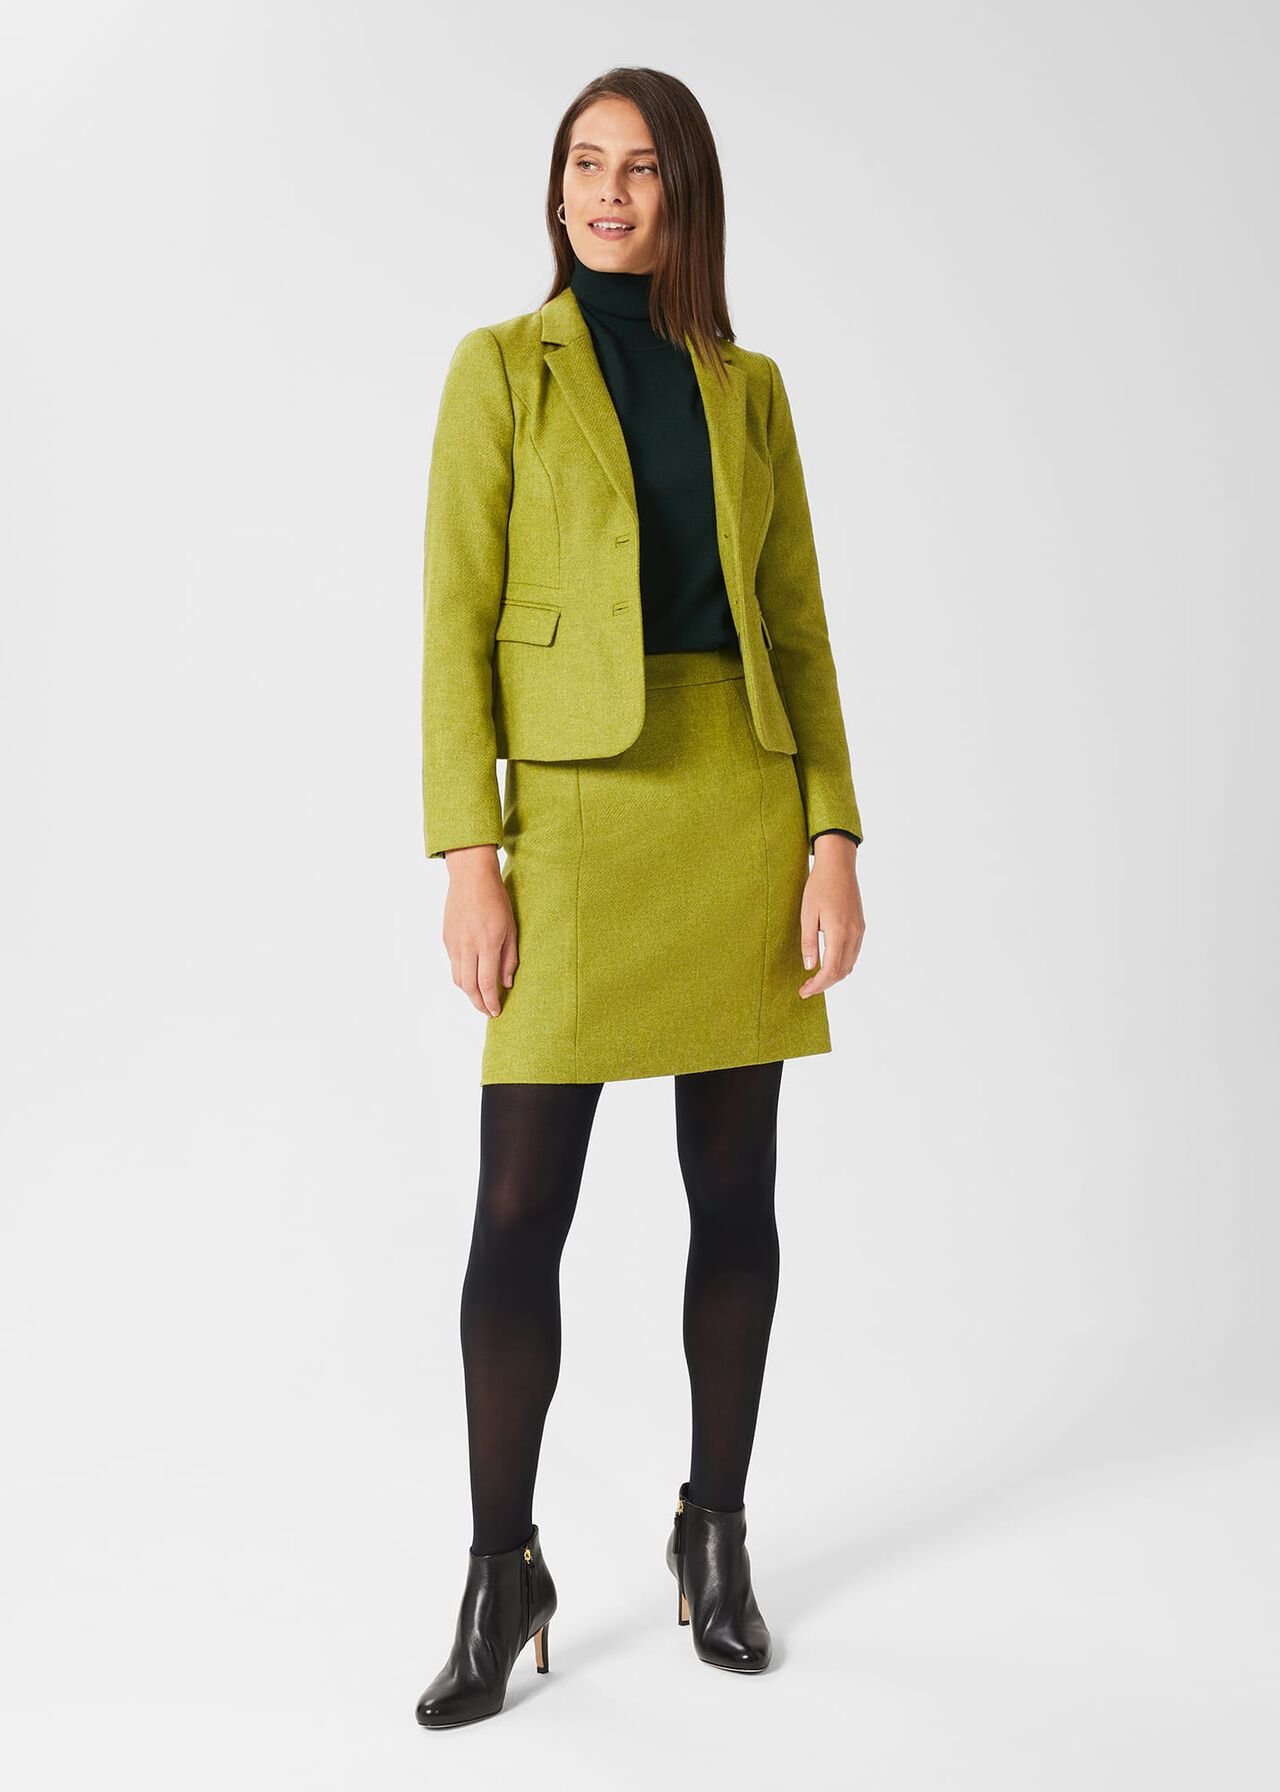 Arianne A Line Wool Skirt, Lime Green, hi-res